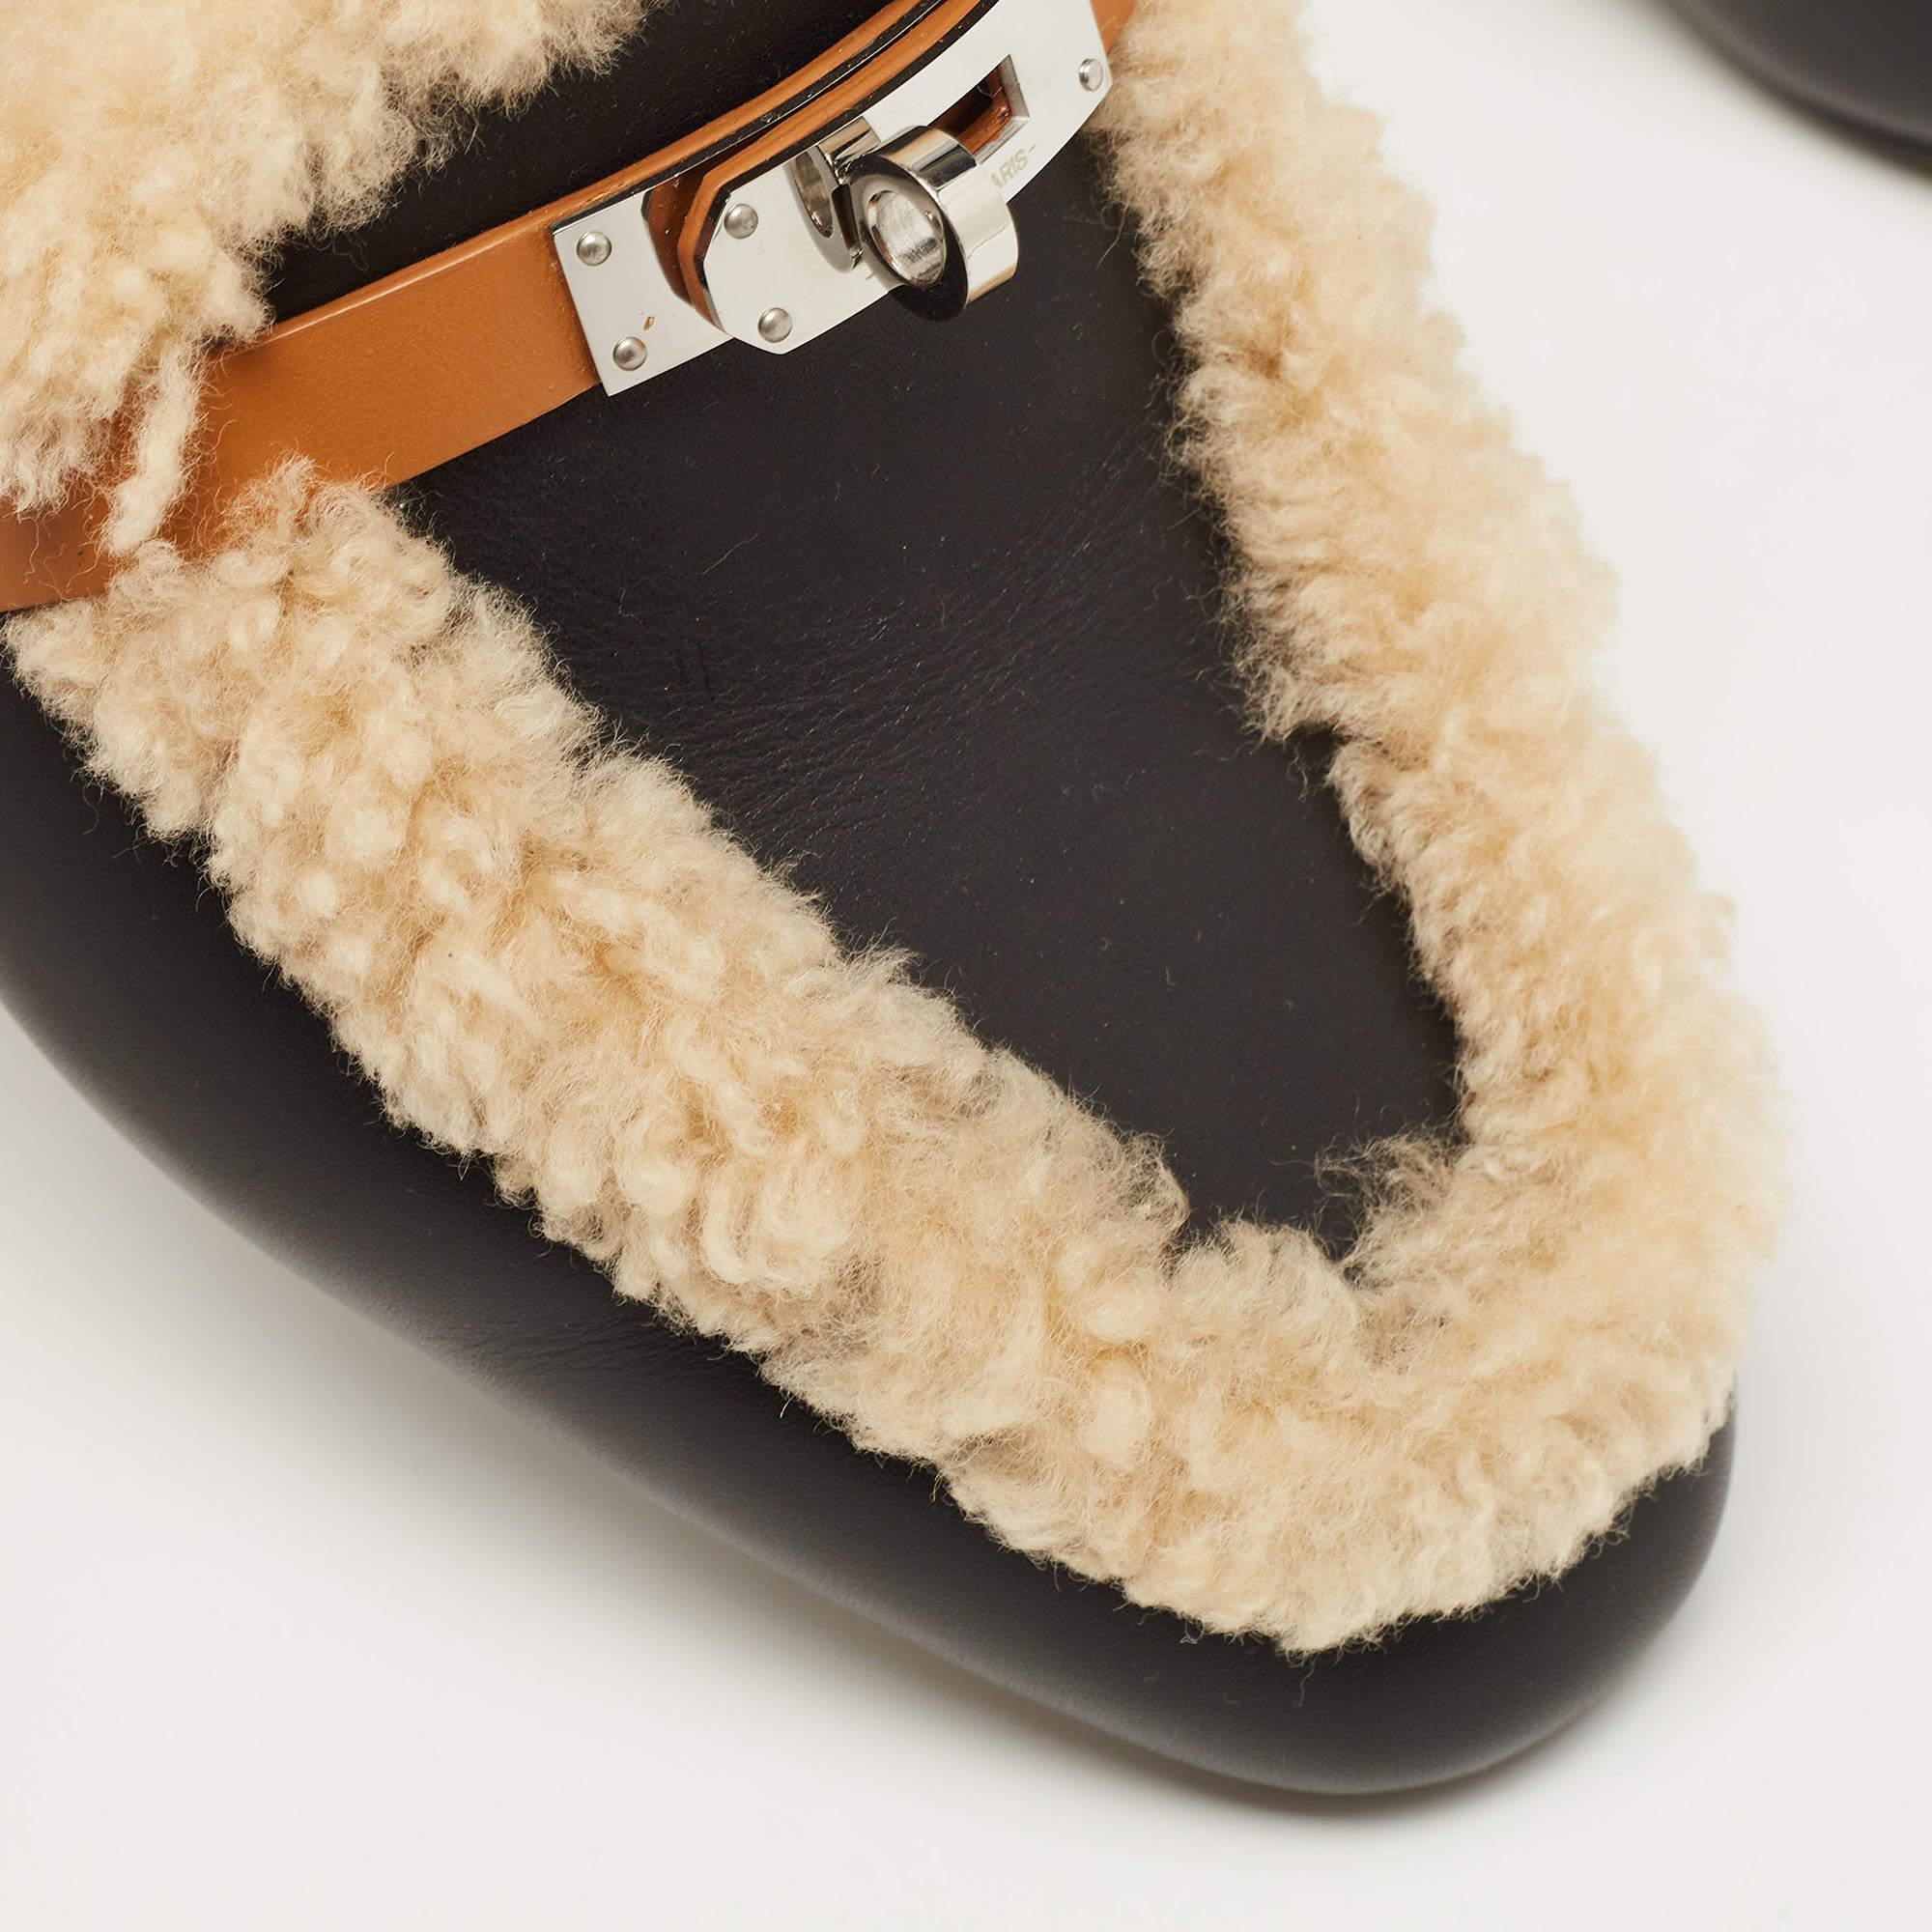 Hermes Black/Beige Leather and Shearling Fur Oz Flat Mules Size 40 1